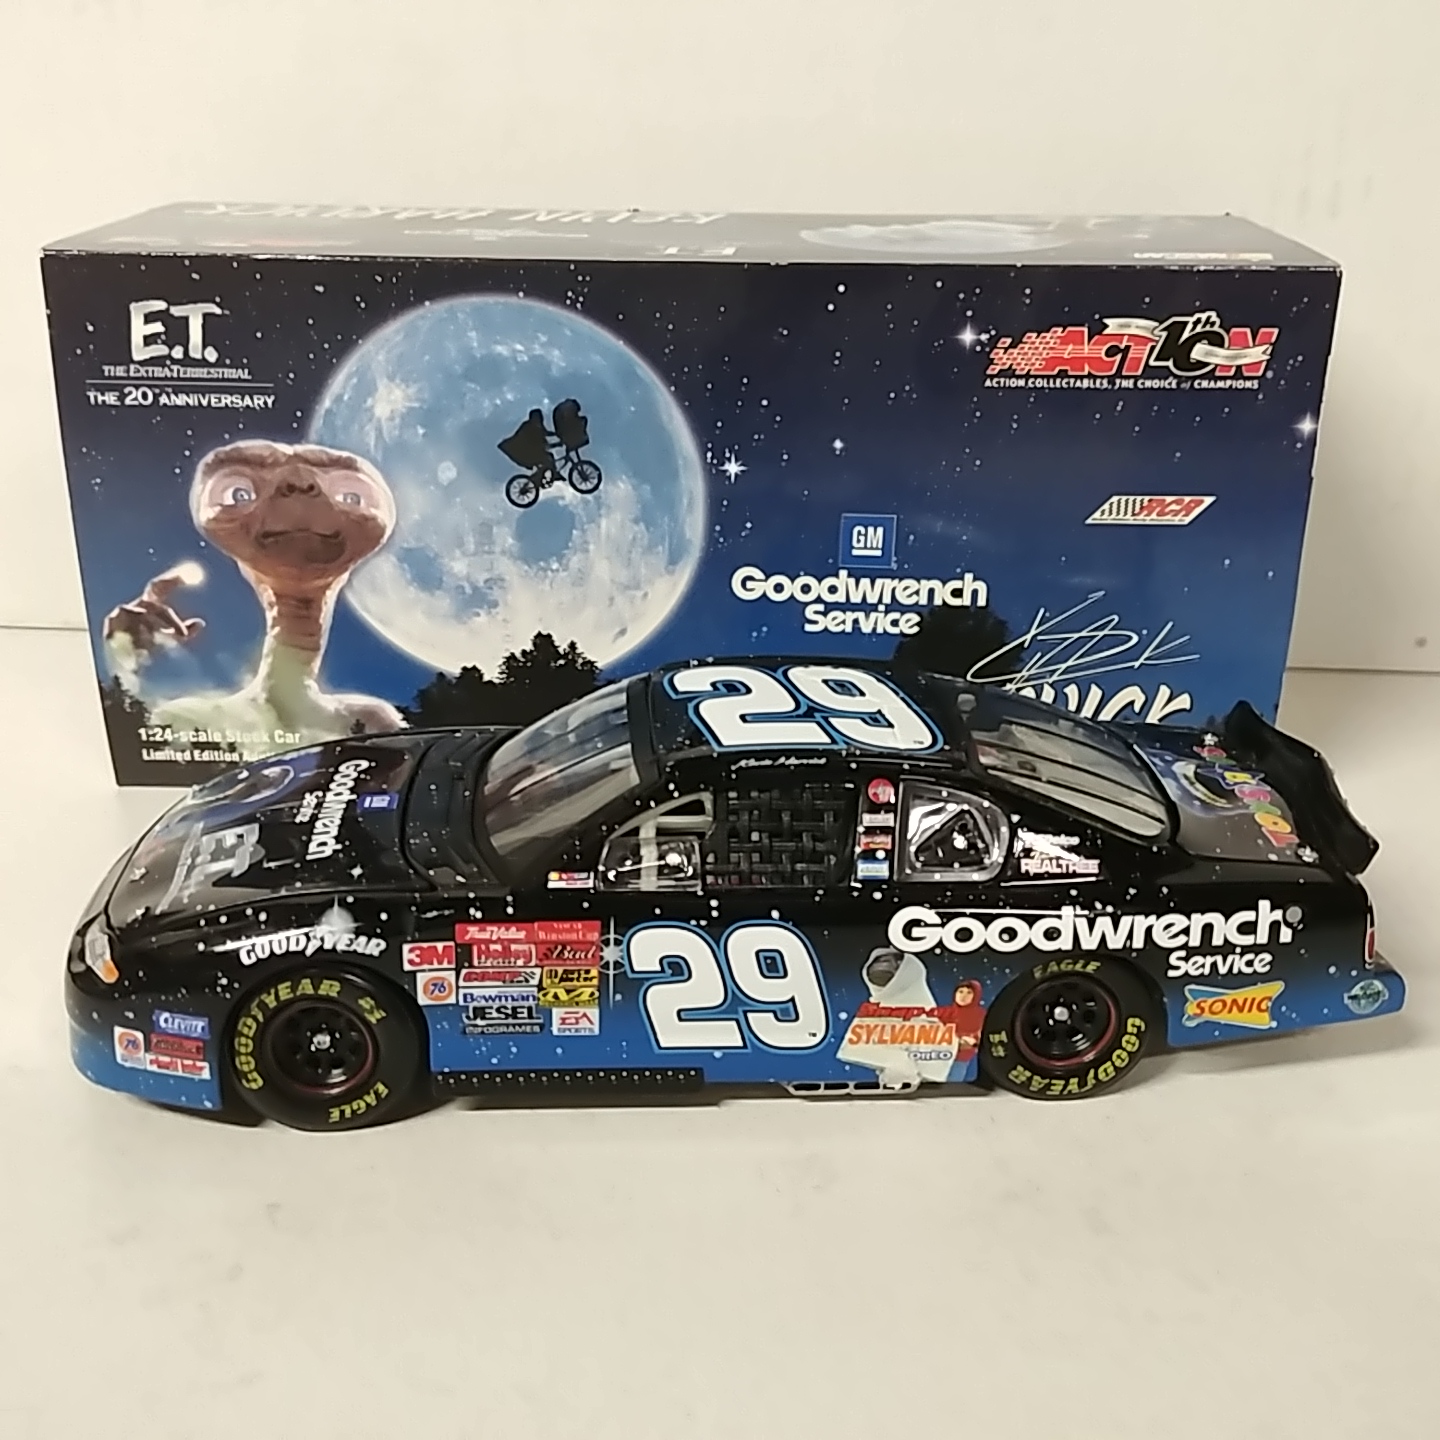 2002 Kevin Harvick 1/24th GM Goodwrench "ET" c/w car